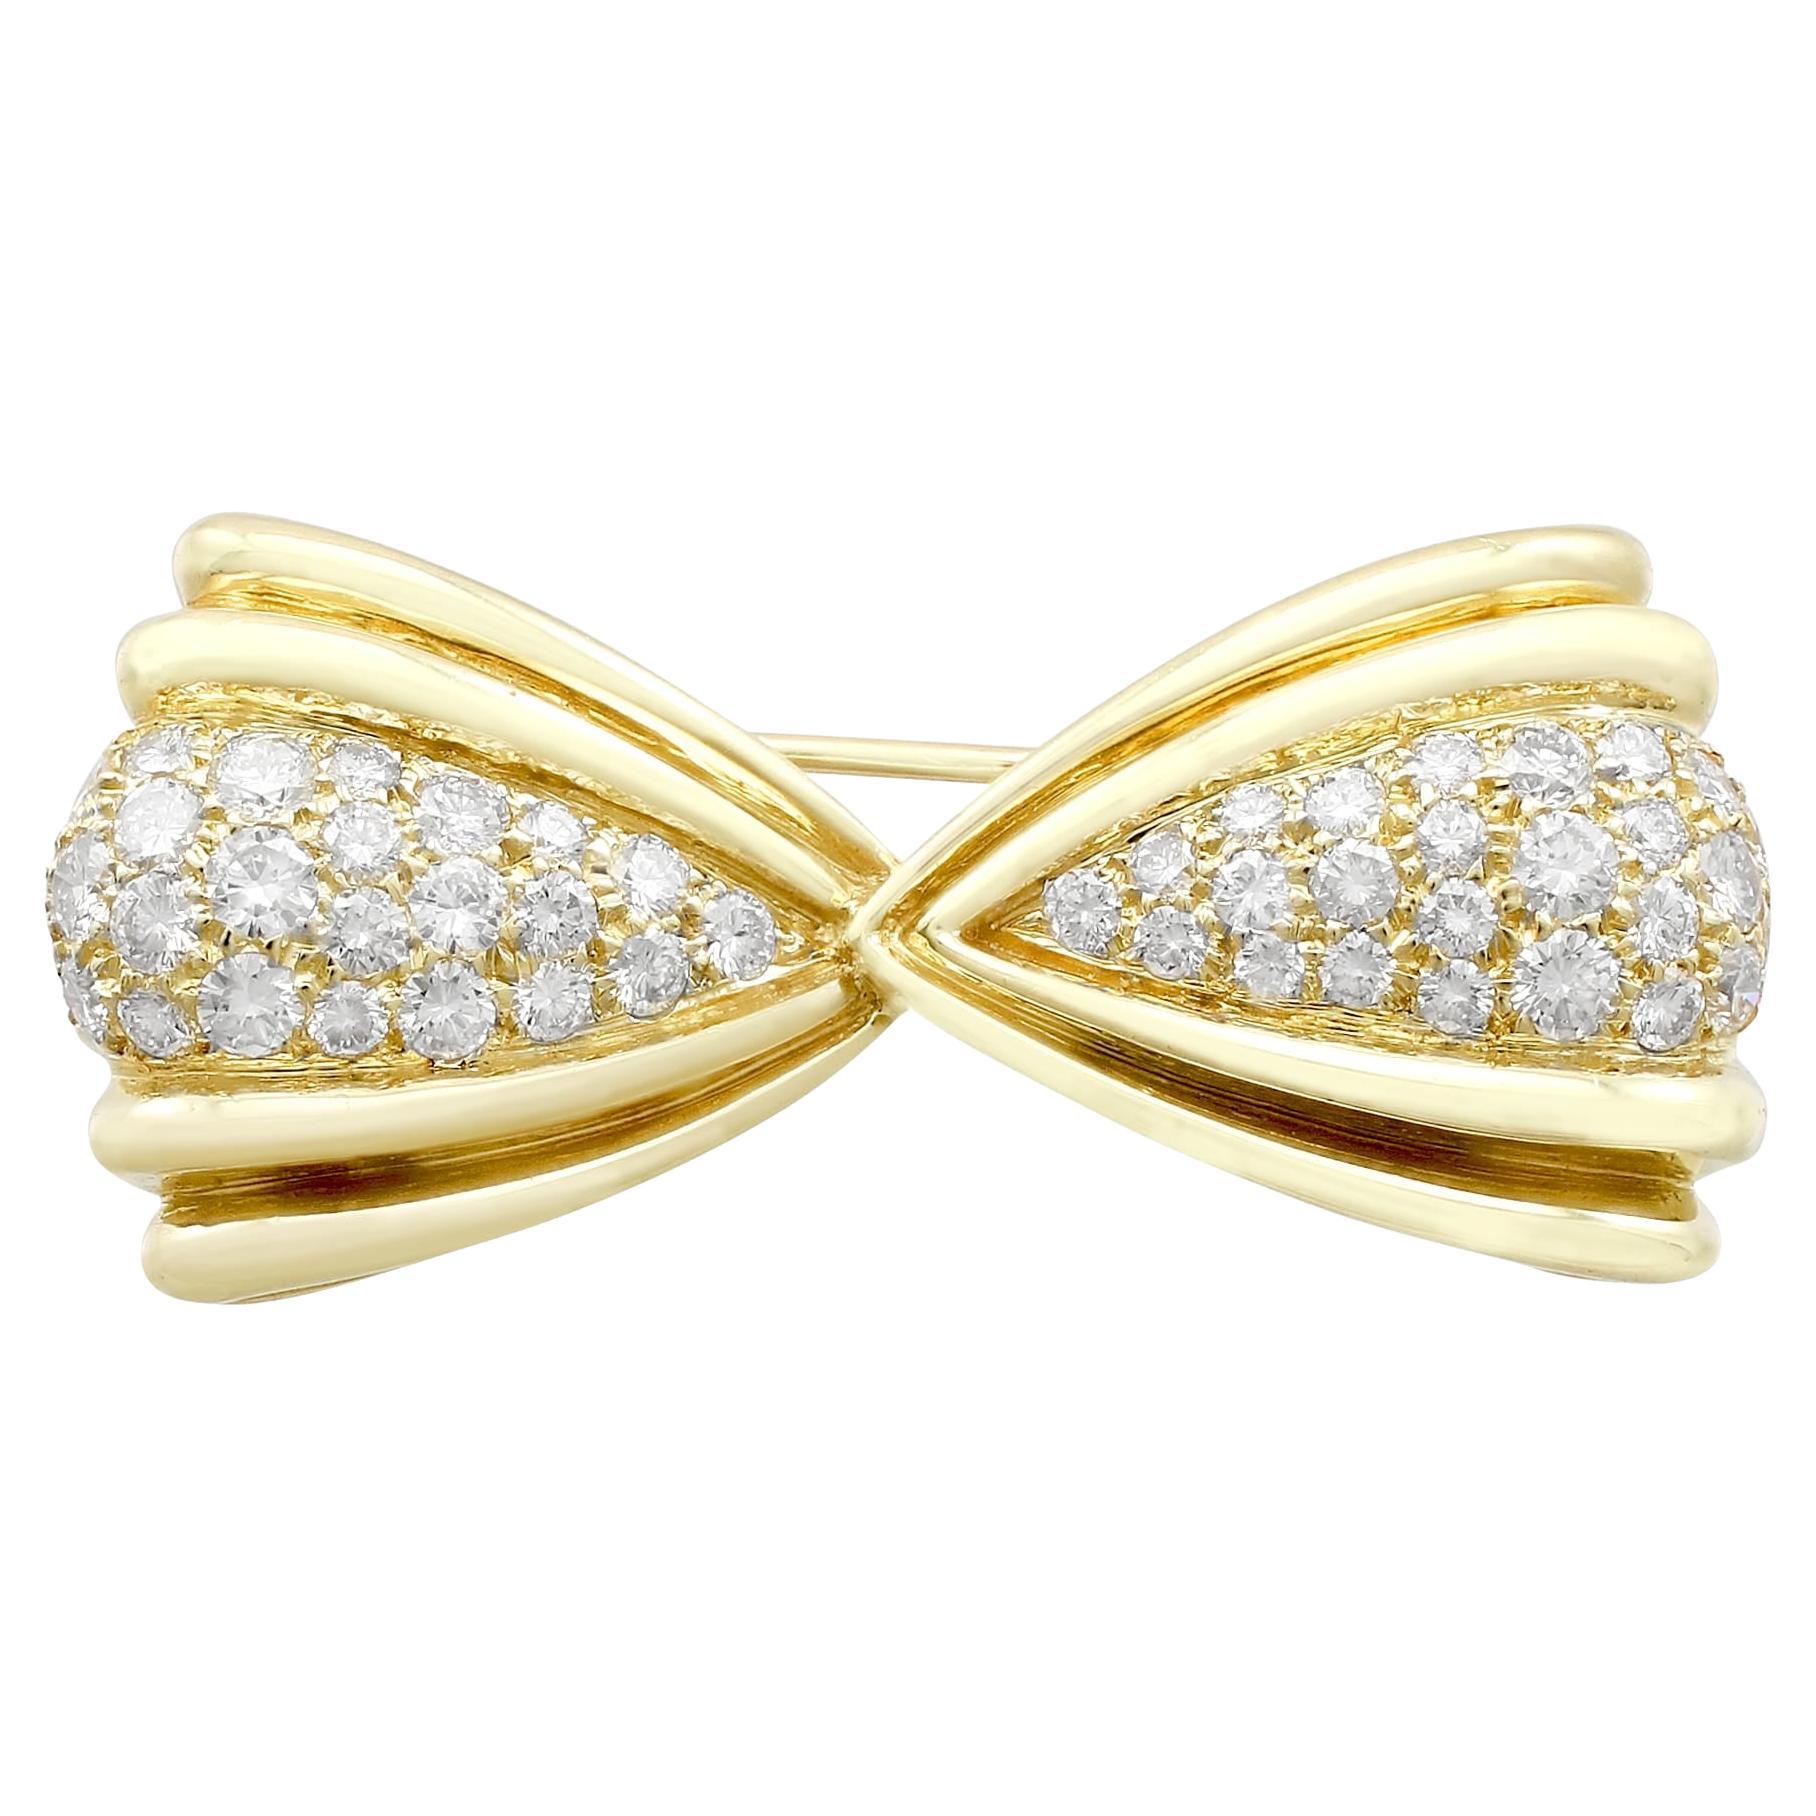 Vintage 1980s 1.68 Carat Diamond and Yellow Gold Bow Brooch For Sale